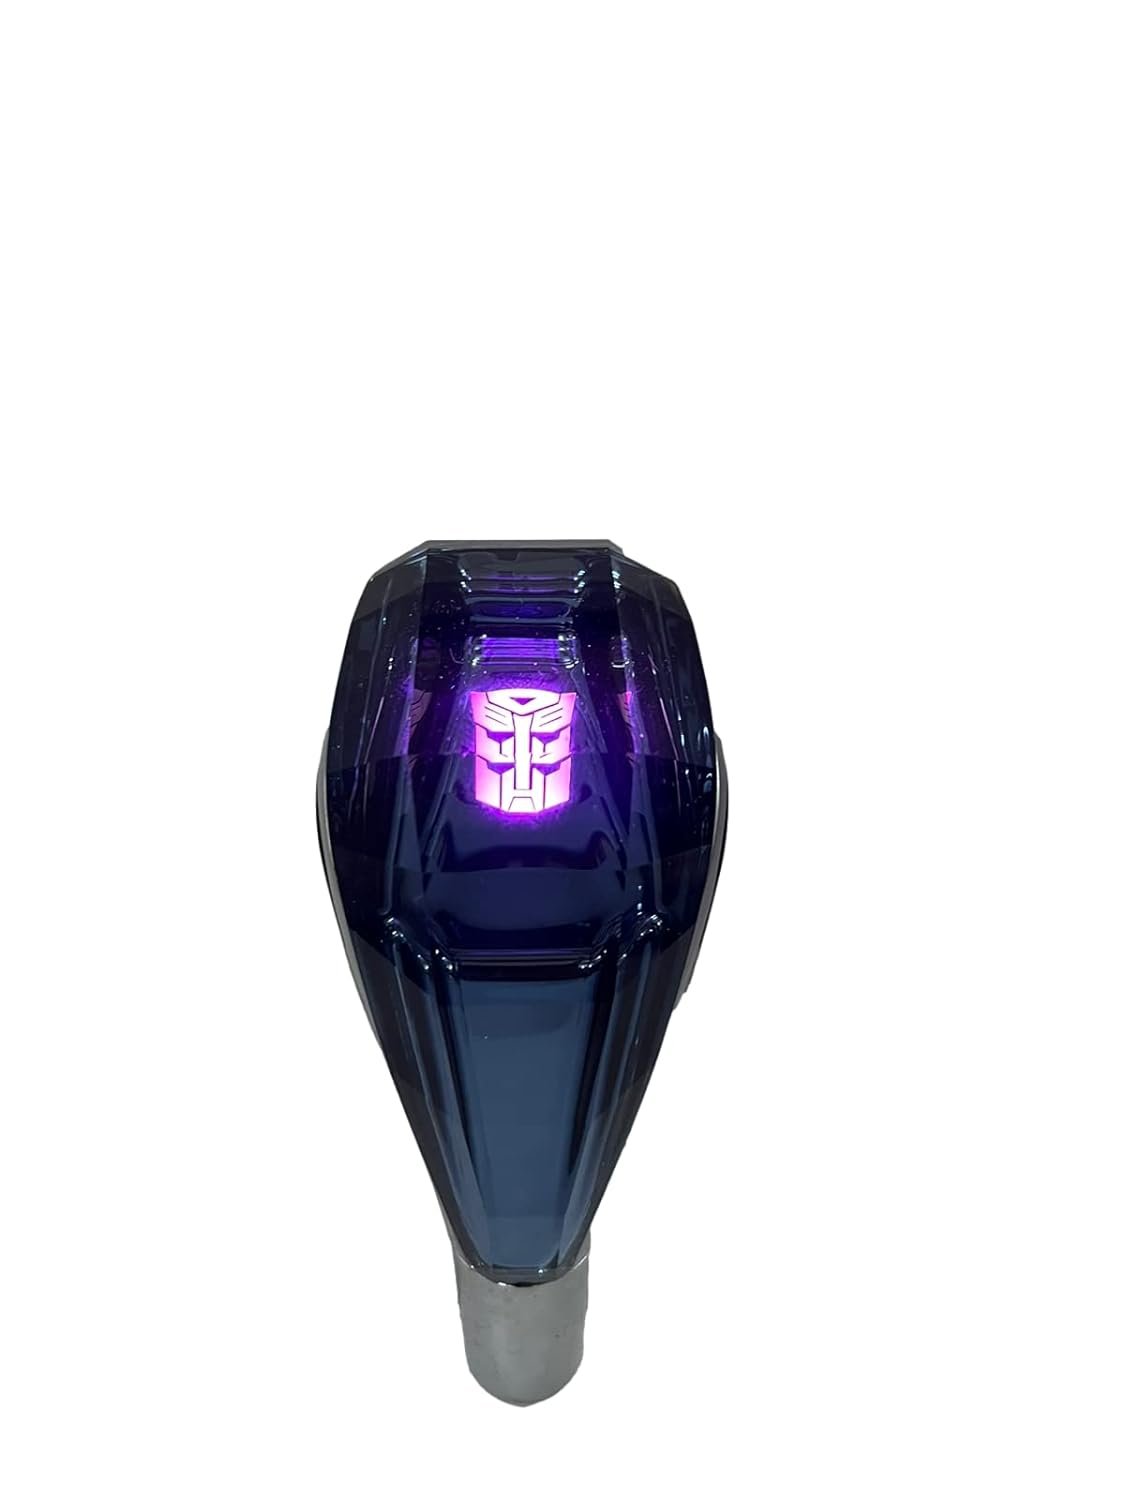 CLOUDSALE Crystal Shift knob Touch Activated Ultra LED Light Illuminated LED Gear Shift Knob Fits for Most Cars with Button-Less Operated Shifter (Trans-Former) Image 